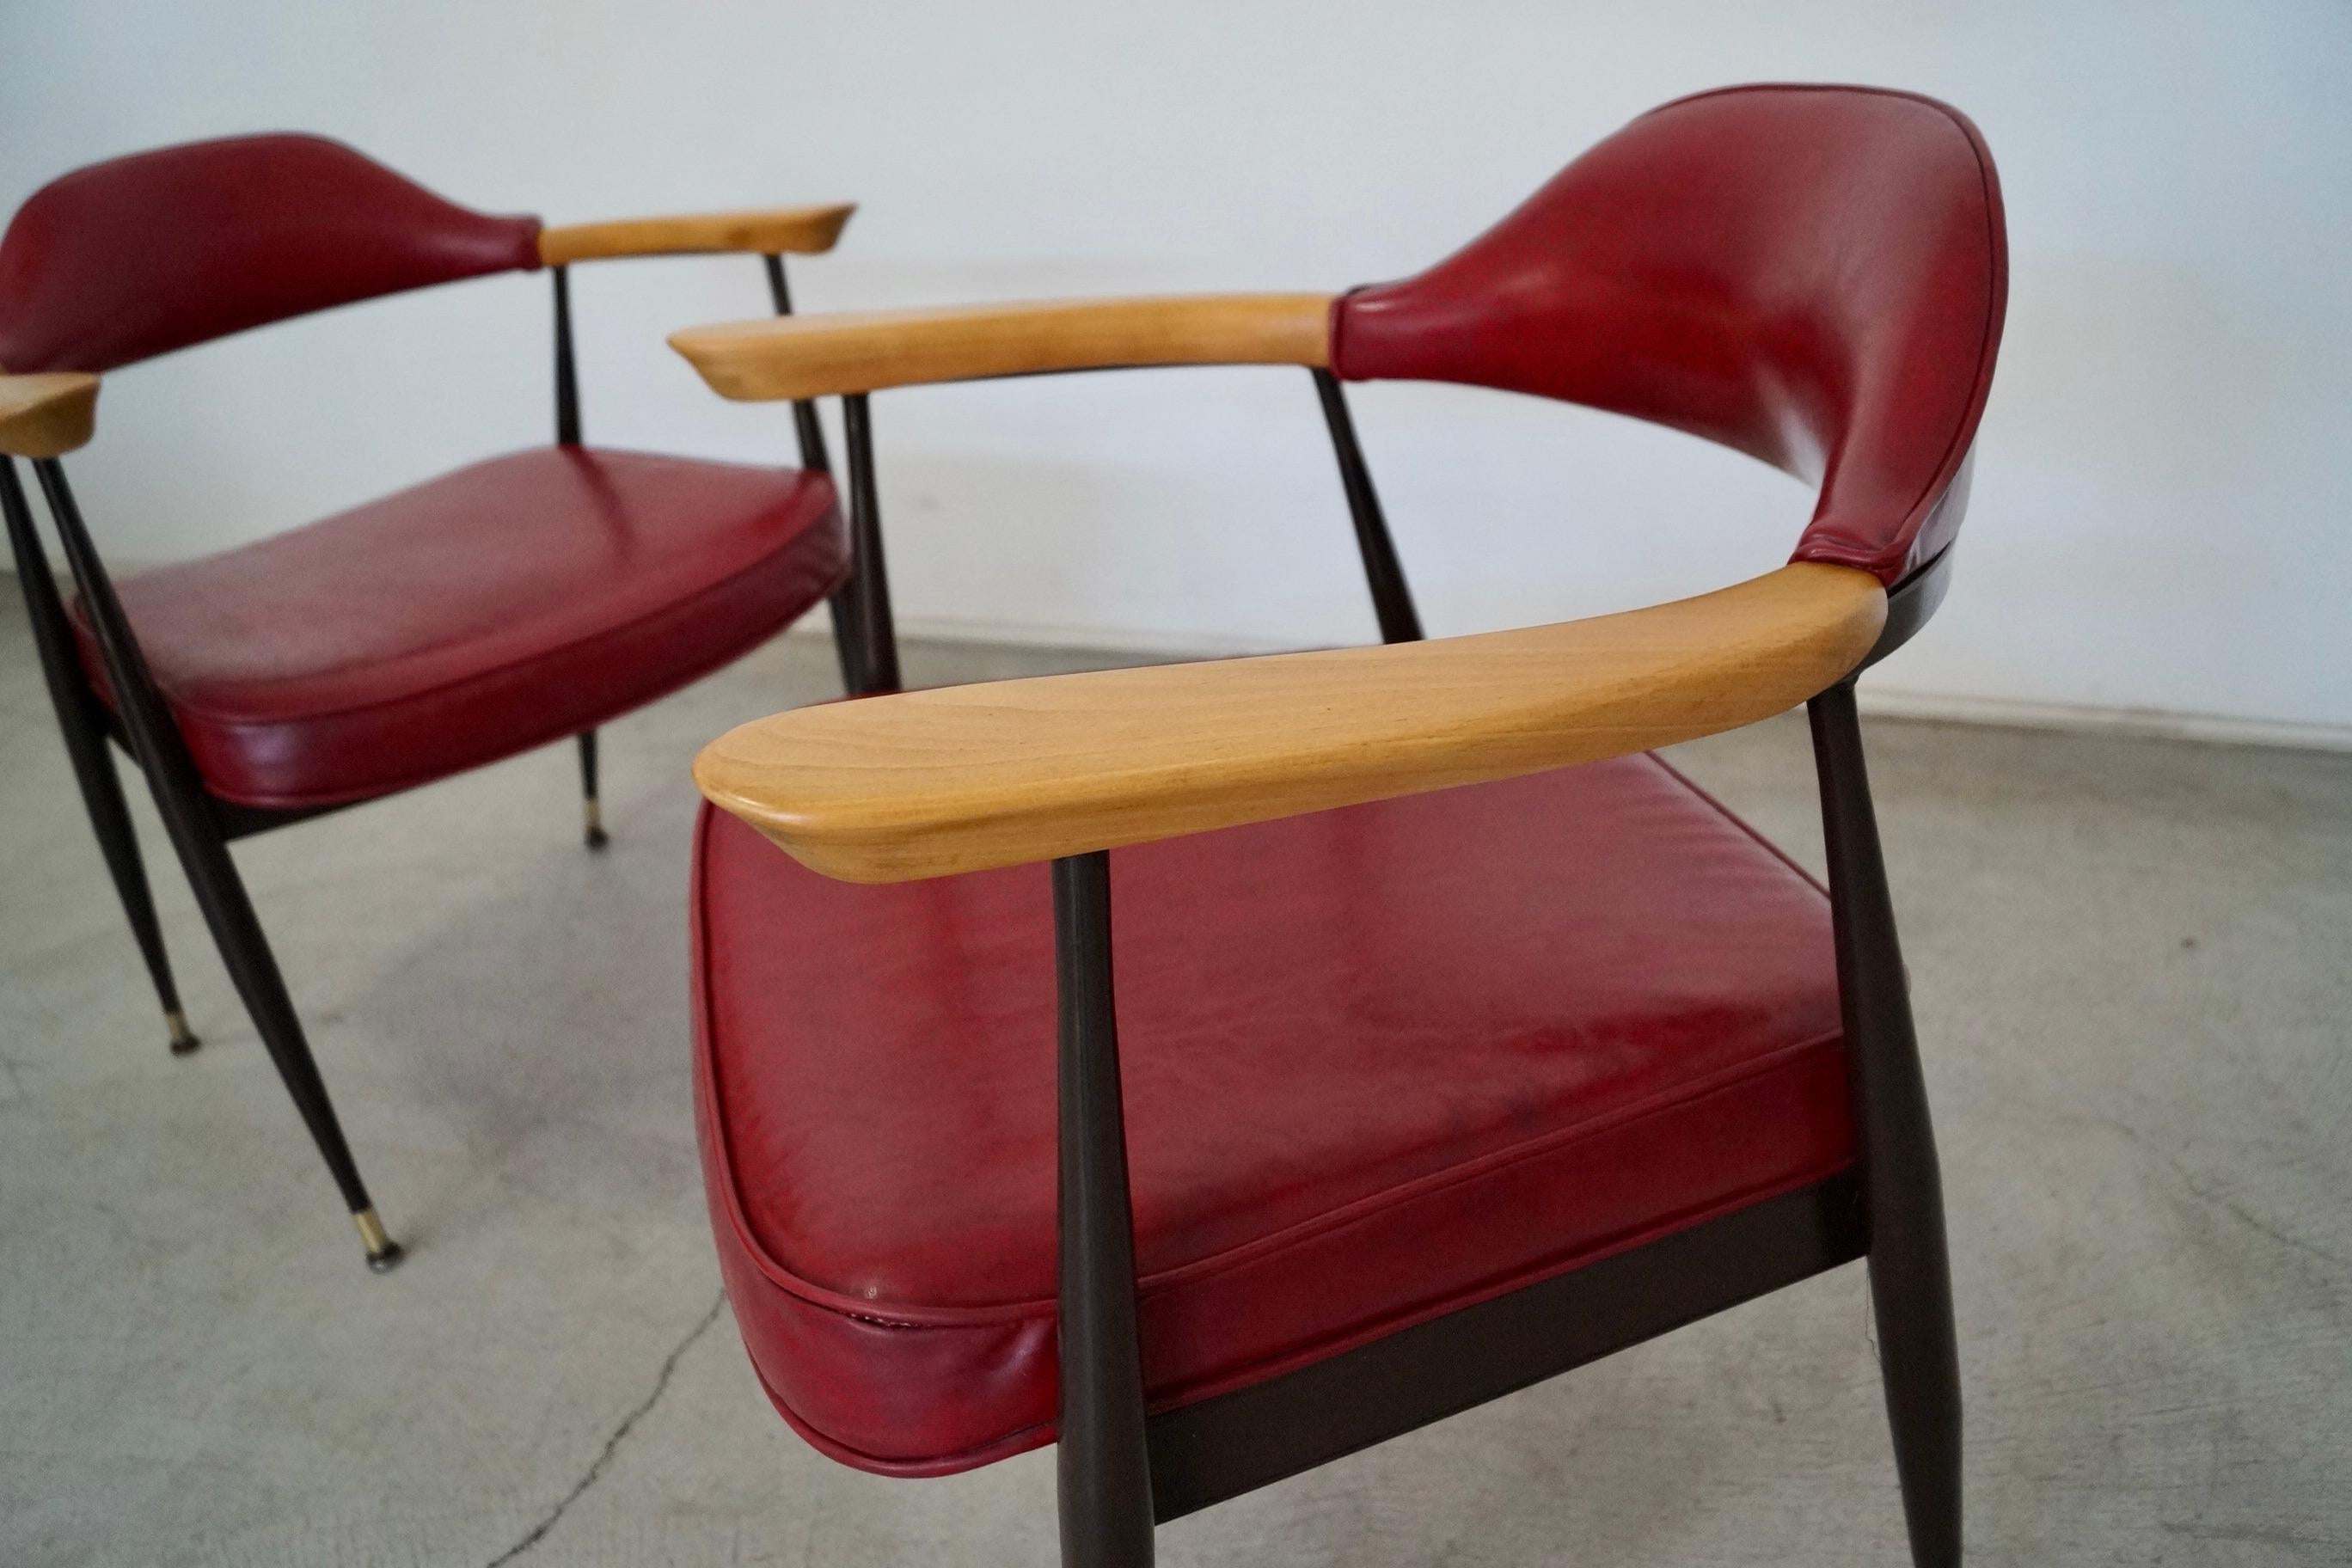 1970's Mid-Century Modern Metal & Wood Armchairs - a Pair For Sale 9